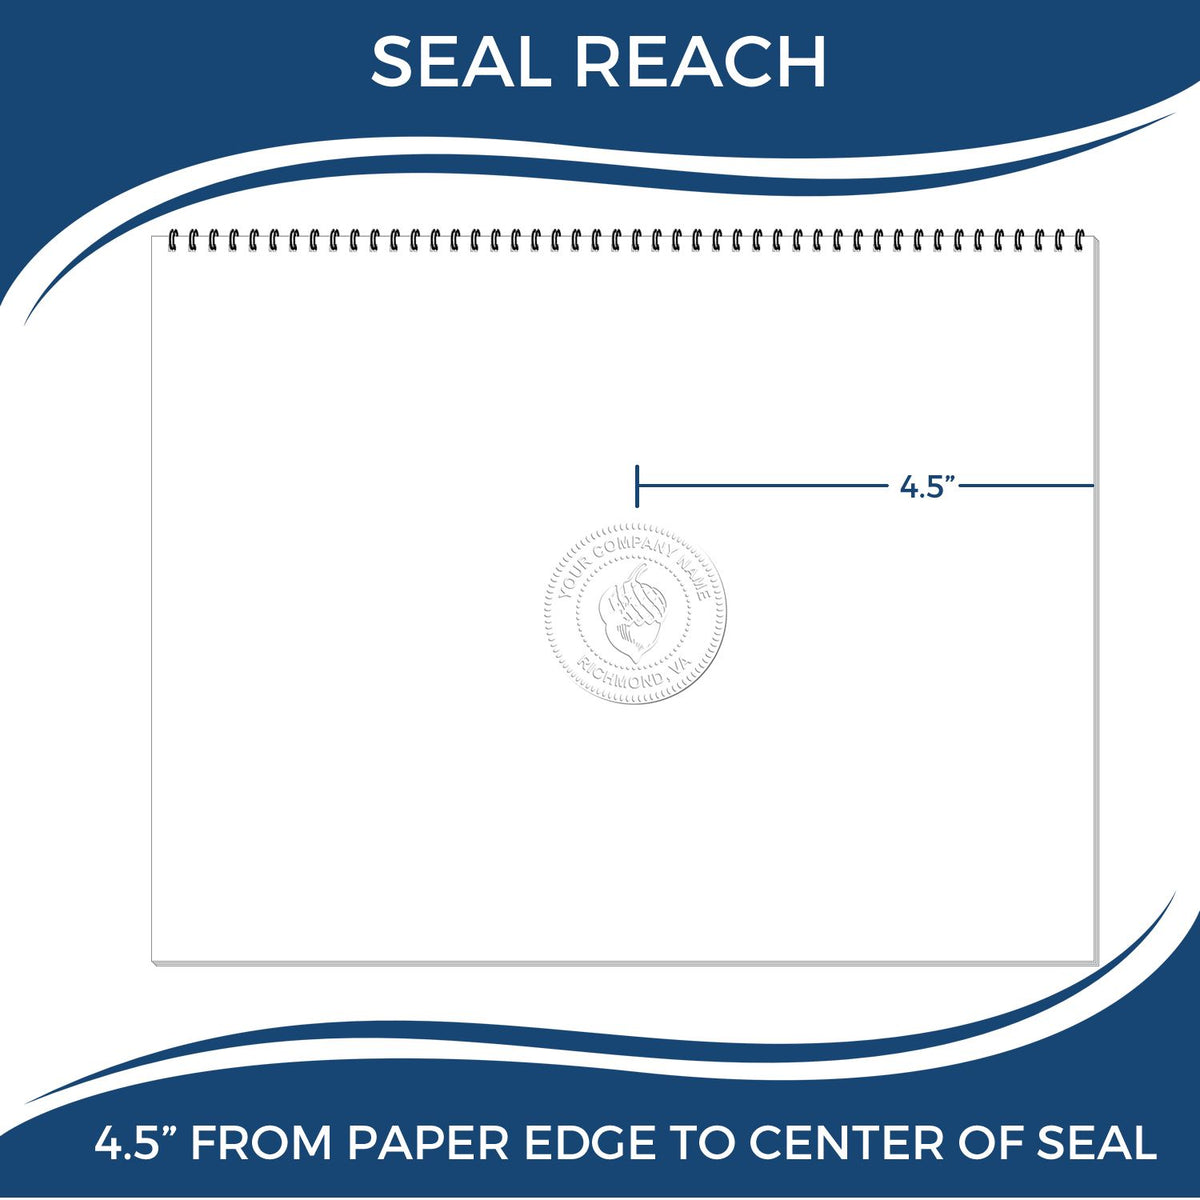 An infographic showing the seal reach which is represented by a ruler and a miniature seal image of the Extended Long Reach Nebraska Architect Seal Embosser